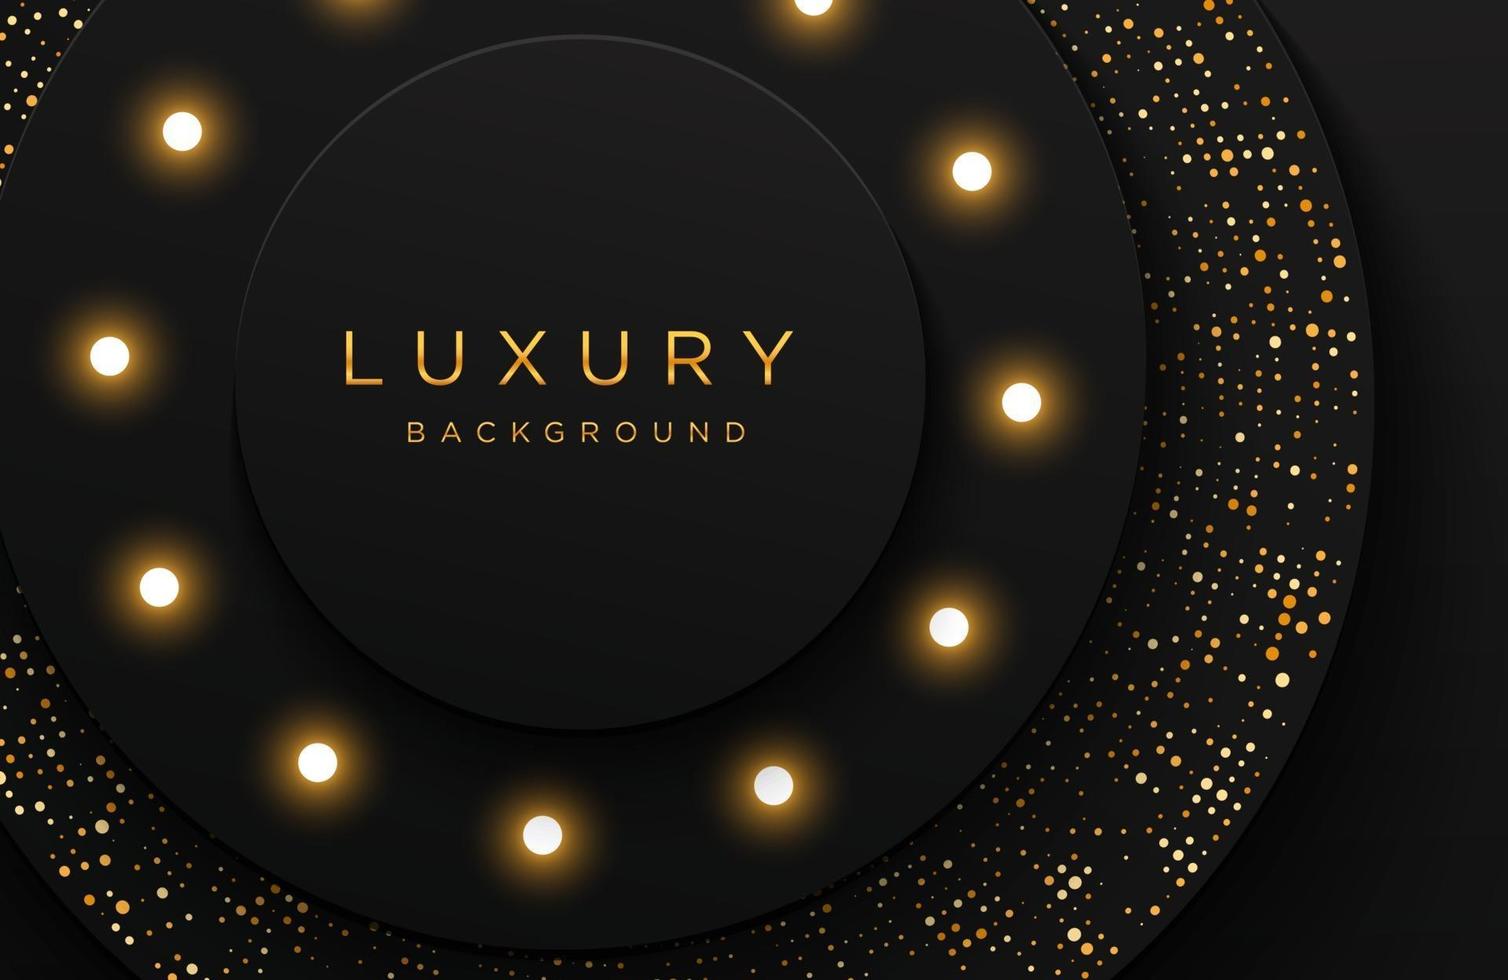 Luxury elegant background with shiny gold dotted pattern and light bulb isolated on black. Abstract realistic papercut background. Elegant template vector